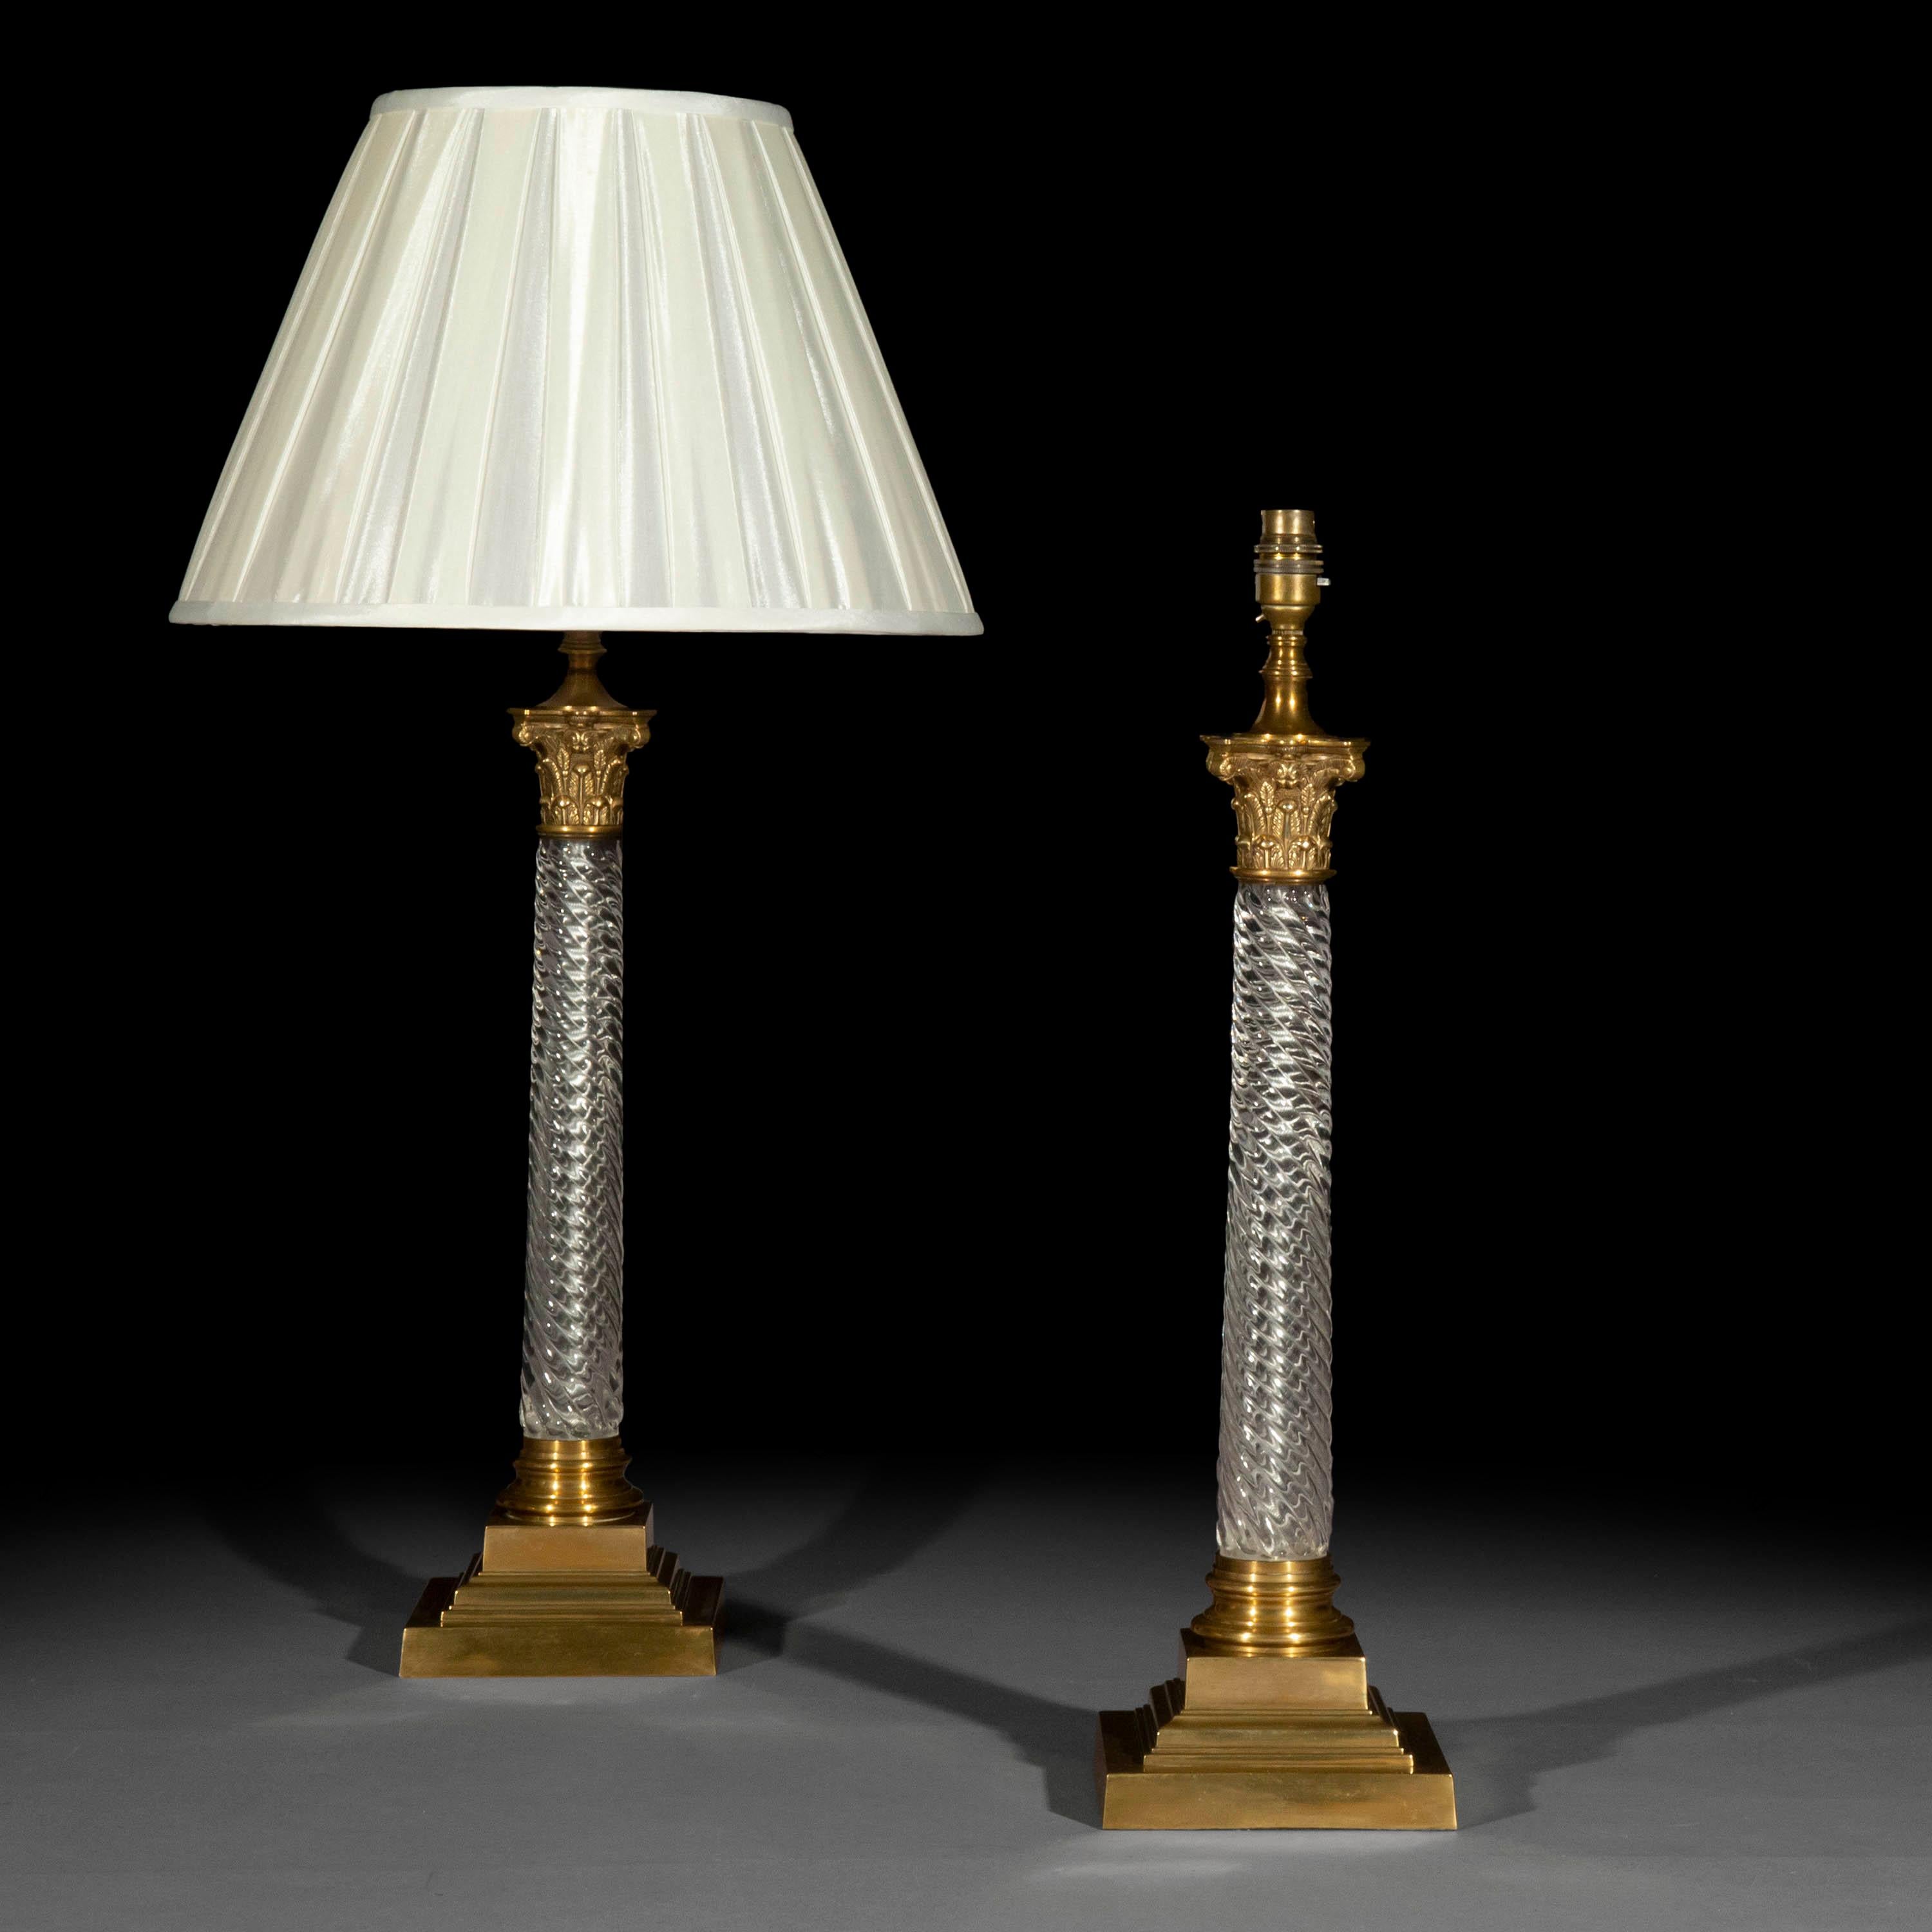 An impressive pair of finely cast, lacquered brass and glass table lamps, fashioned as Corinthian columns.

20th century.

Ultimately classical, timeless design inspired by the classical examples, these elegant table lamps are